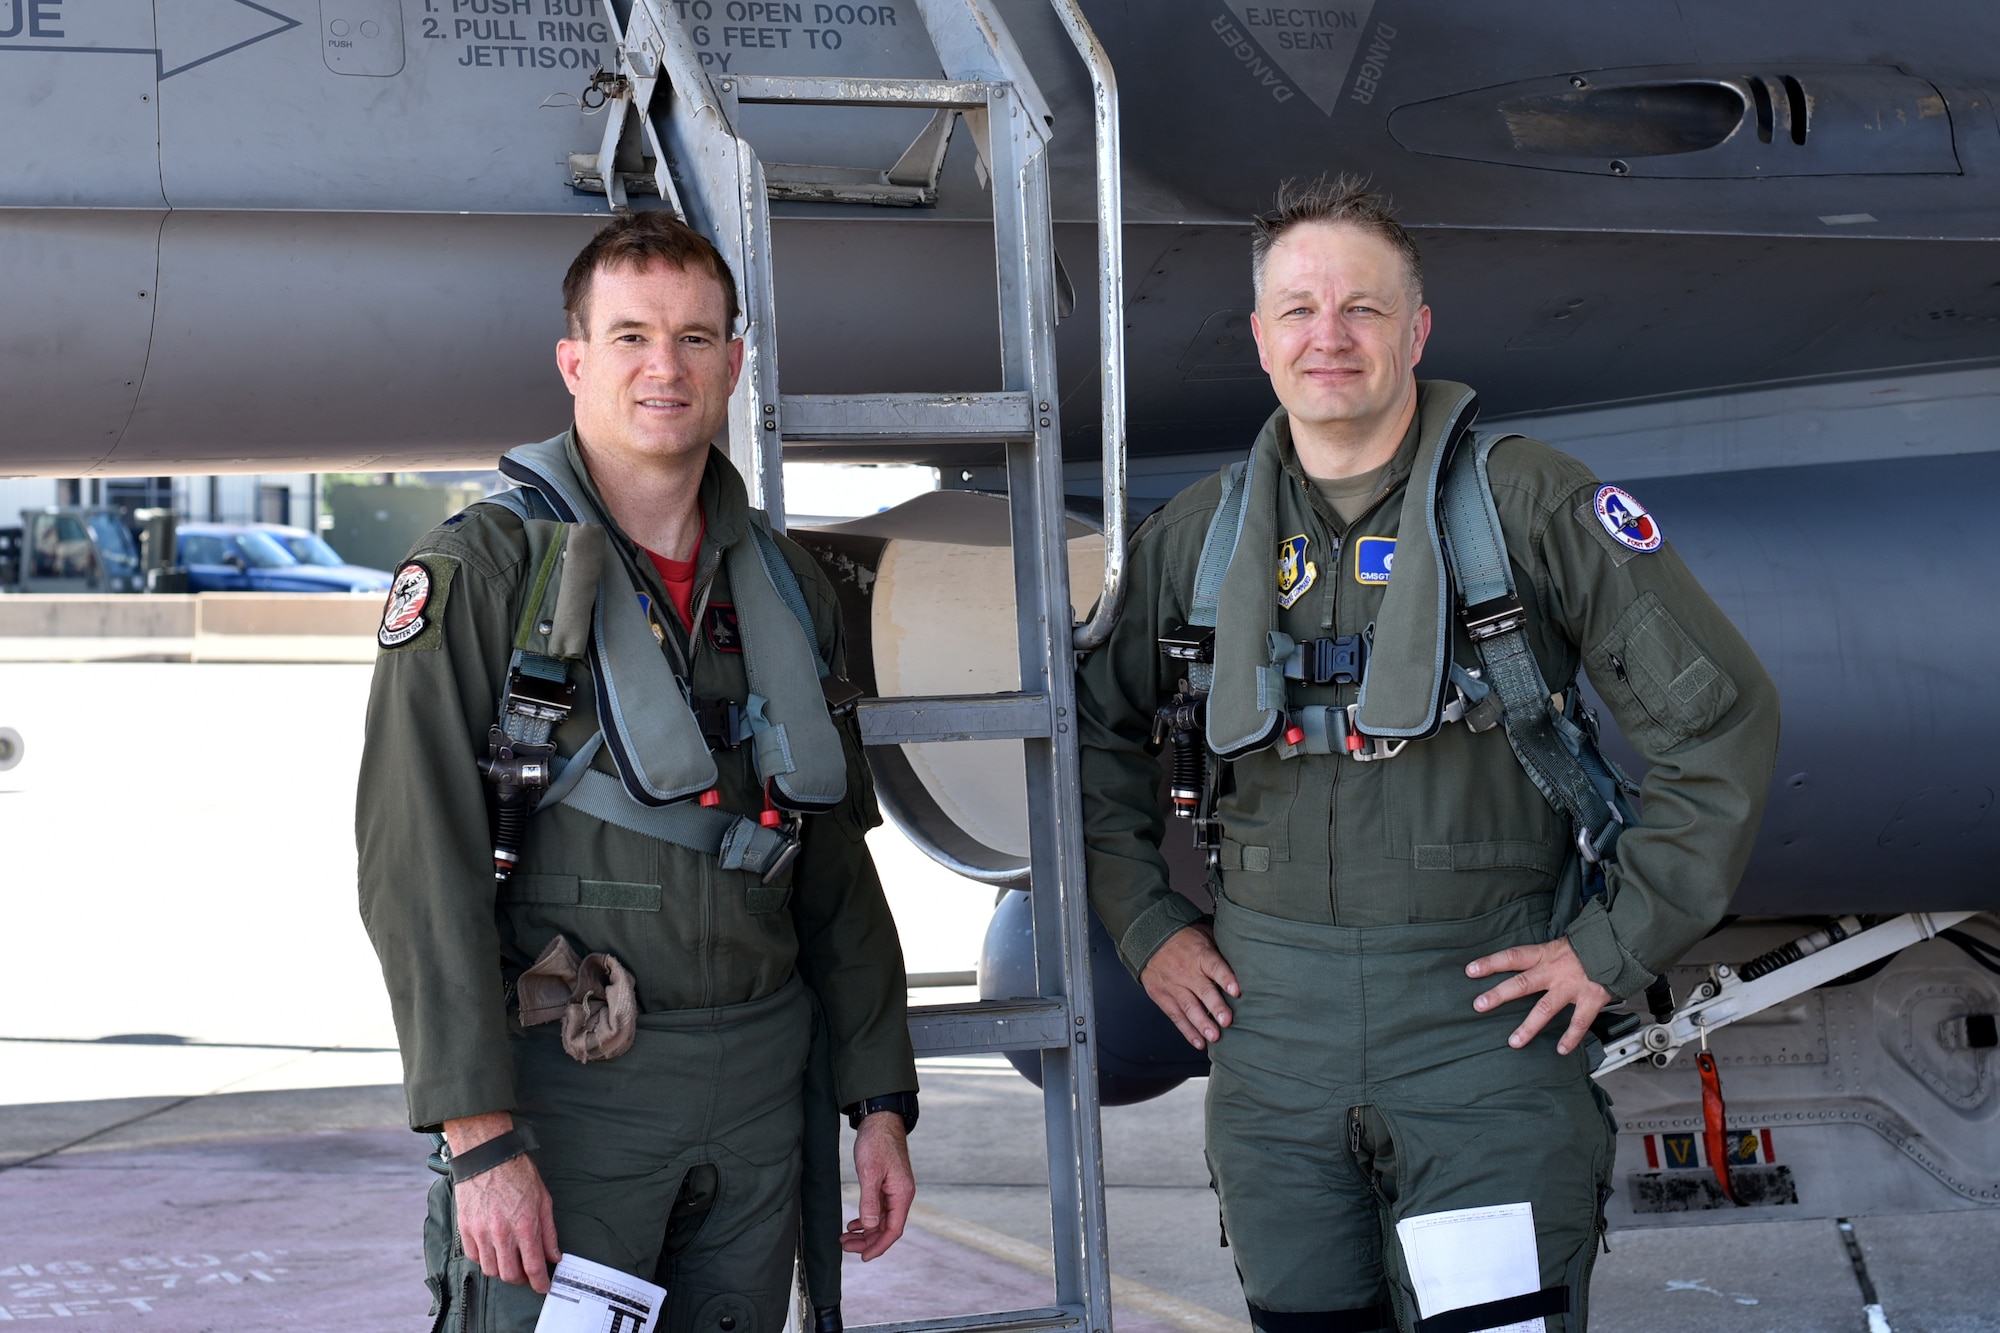 Lt. Col. Kenneth Seiver, a 457th Fighter Squadron F-16 pilot and Chief Master Sgt. James Loper, 10th Air Force command chief, take a moment after a familiarization flight at Naval Air Station Fort Worth Joint Reserve Base, Texas on July 12, 2019. The flight gave Loper a hands-on understanding of the jet's capabilities and the squadron’s mission. (U.S. Air Force photo by Senior Airman Randall Moose)